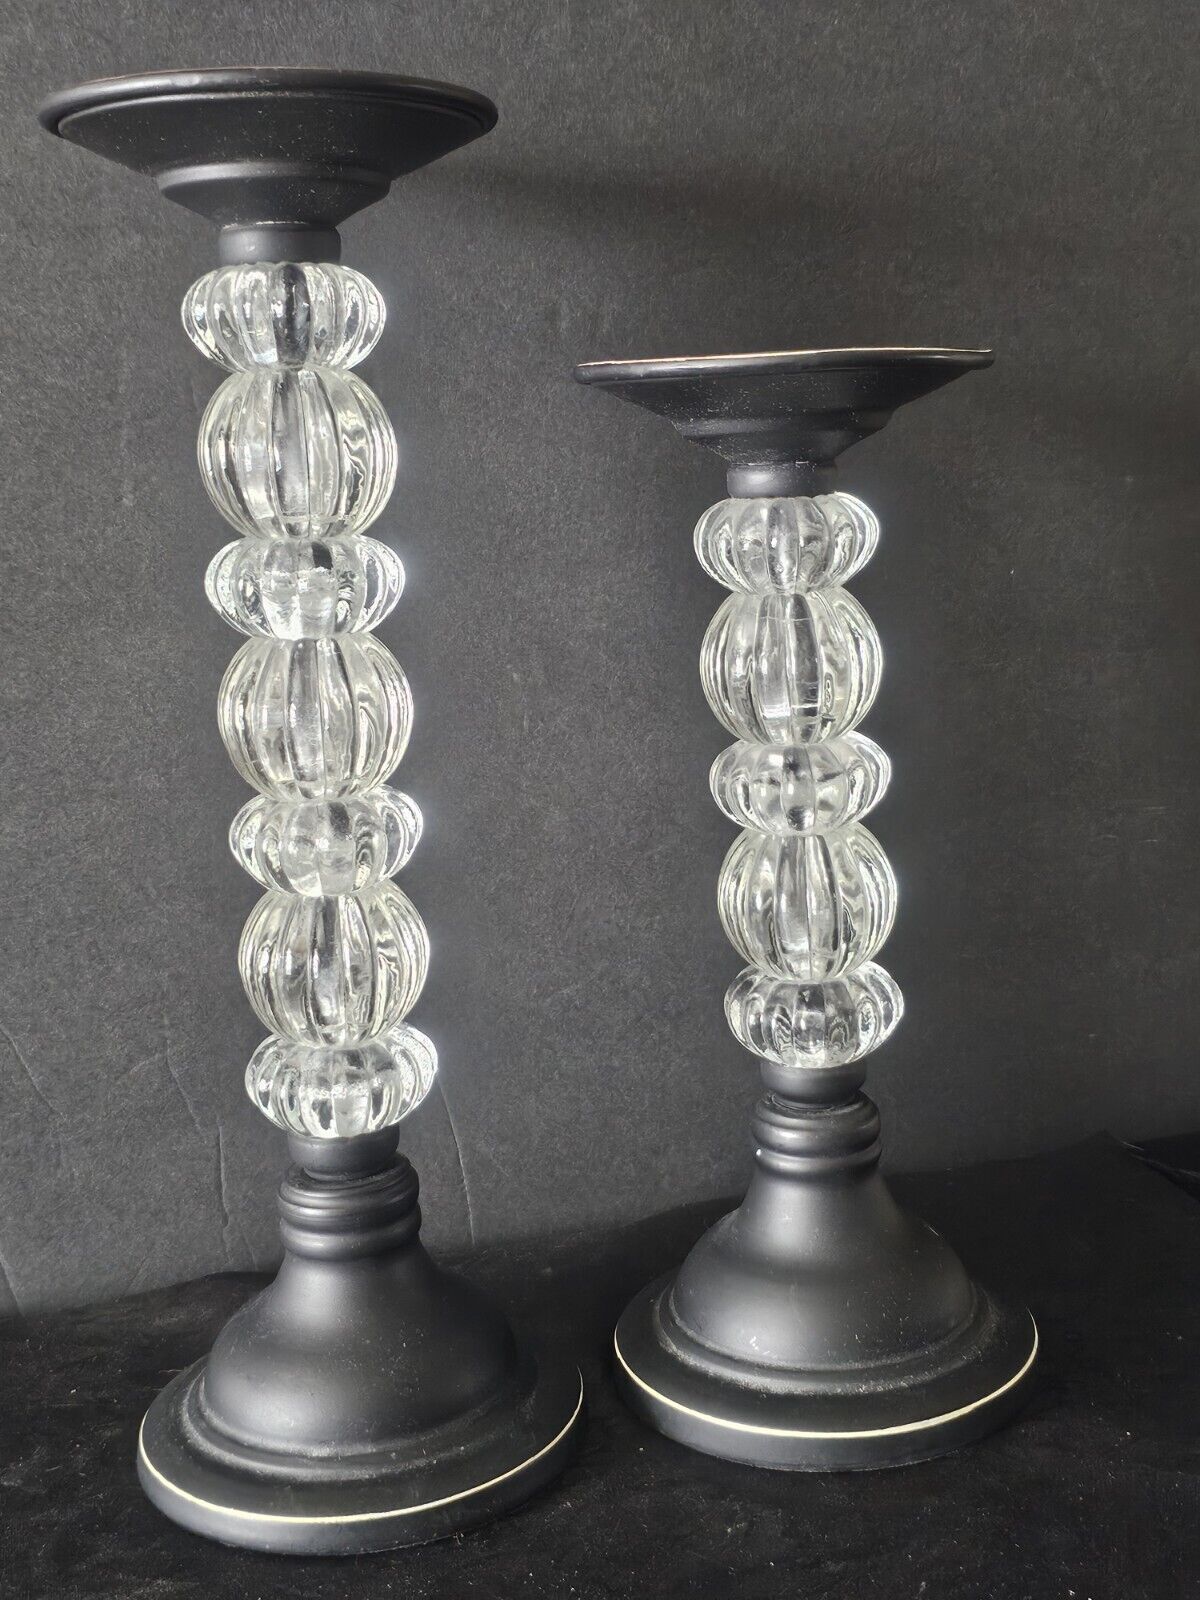 RETIRED PIER 1 Glass & Black Wood Candle Stick Holders Set of 2 MCM BEAUTIFUL